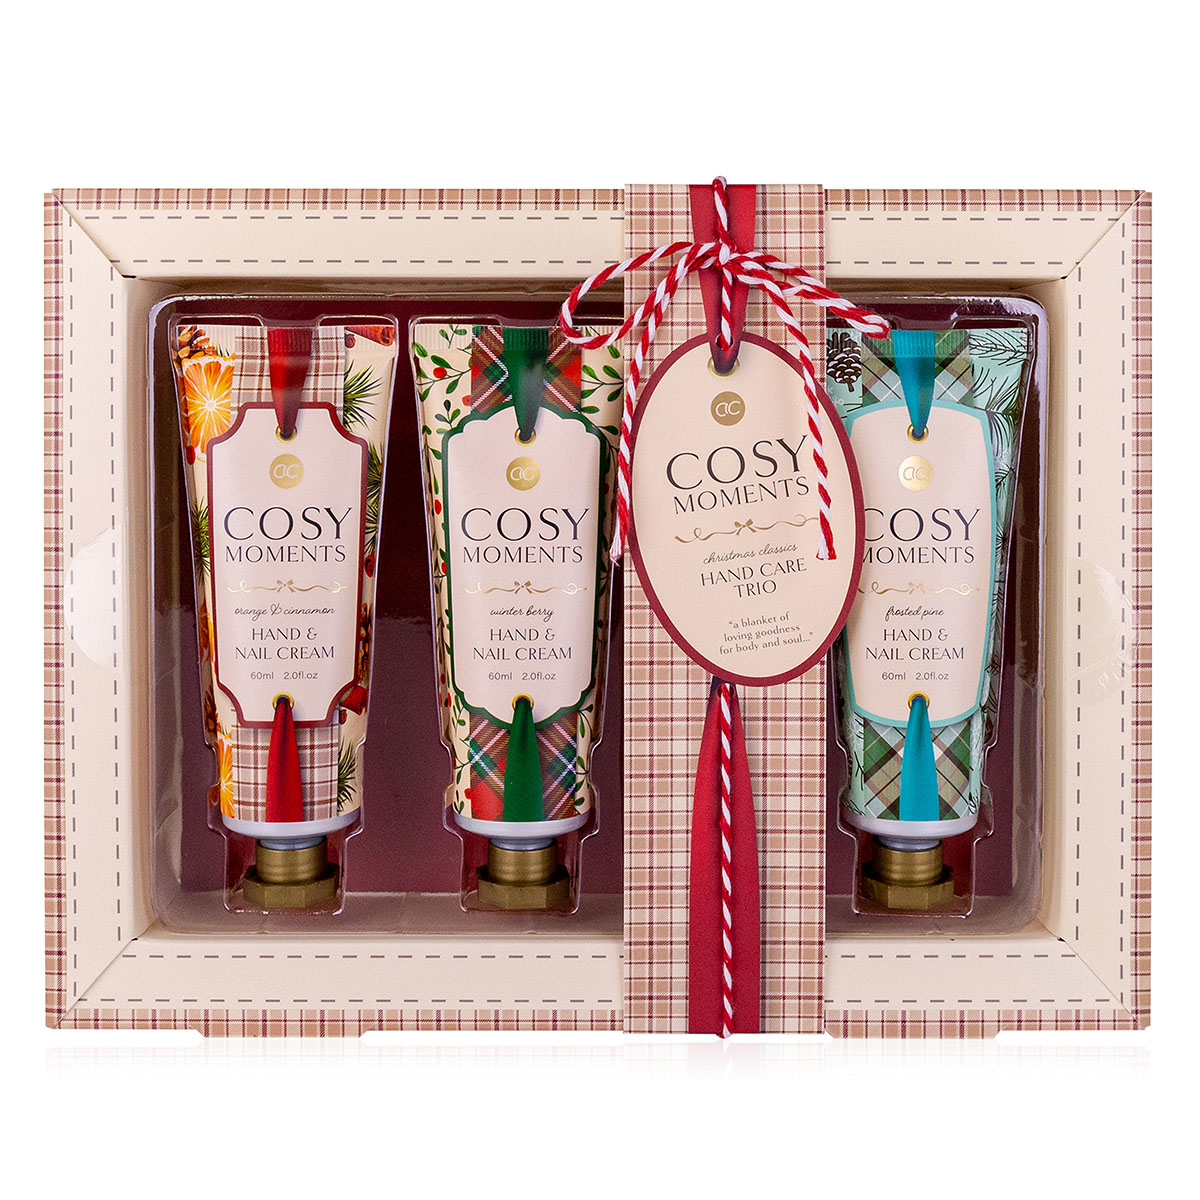 ACCENTRA Hand care set 6054226 Cosy Moments